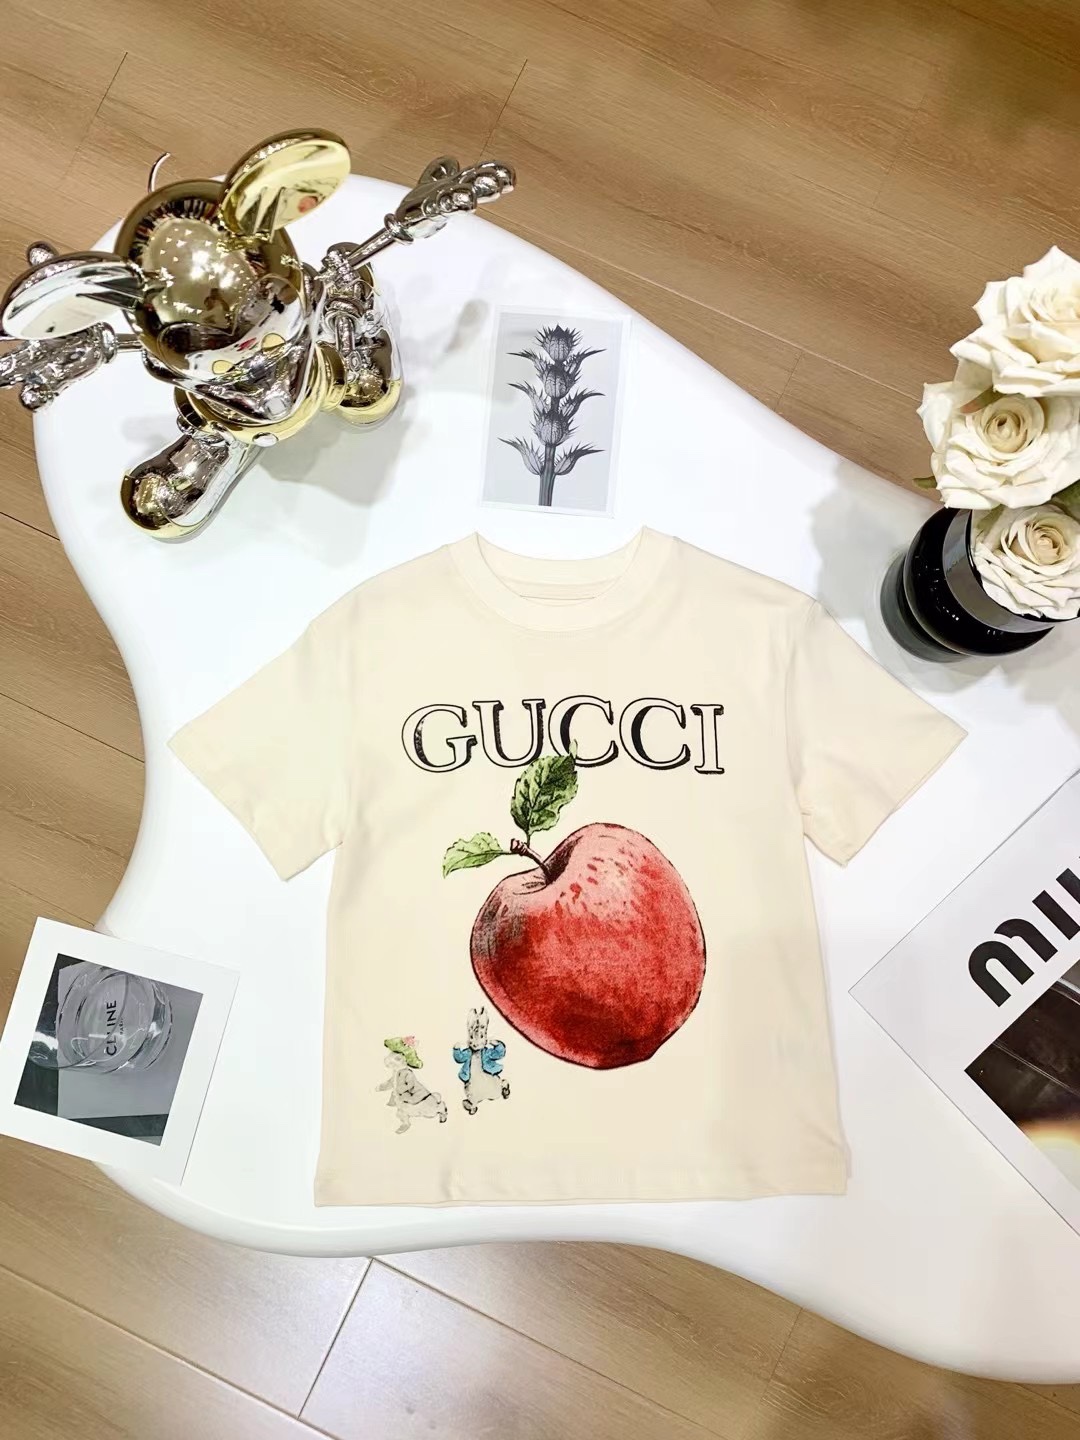 Gucci Clothing Kids Clothes T-Shirt Yellow Printing Kids Boy Girl Spring Collection Short Sleeve